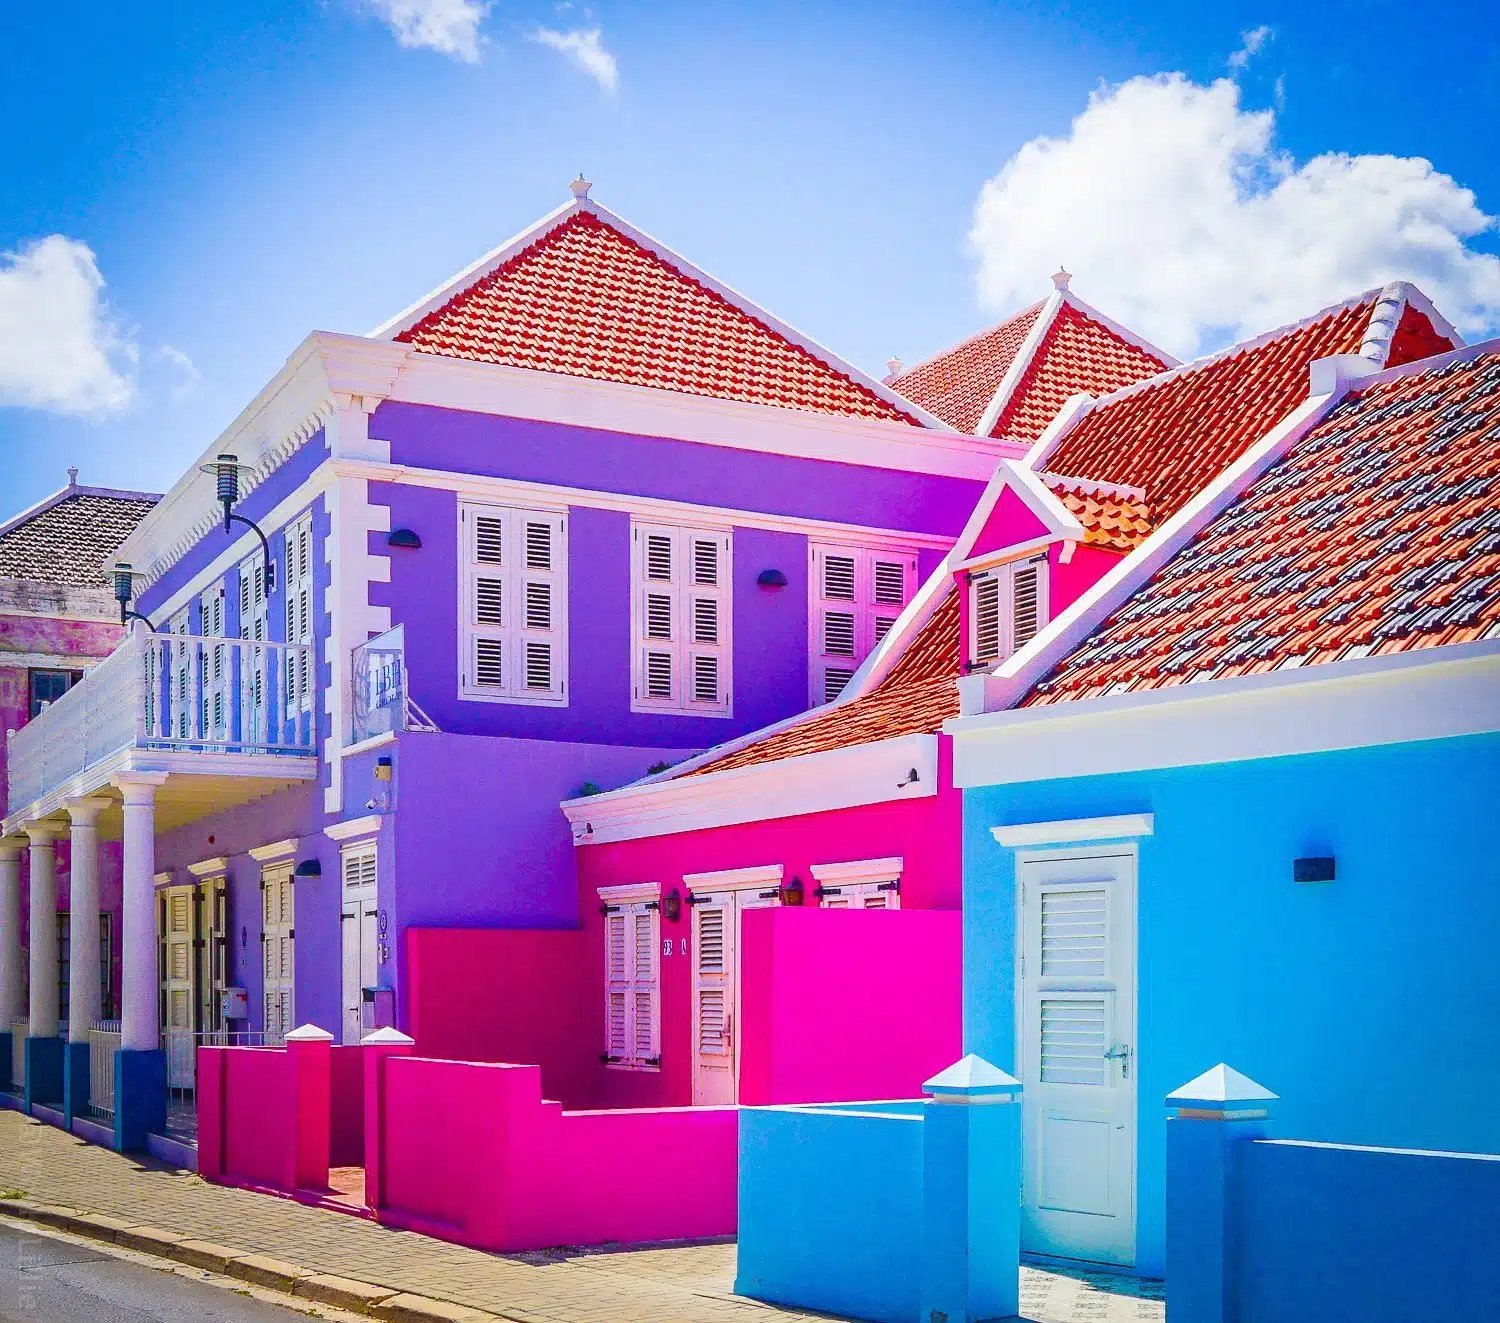 Candy-colored houses.